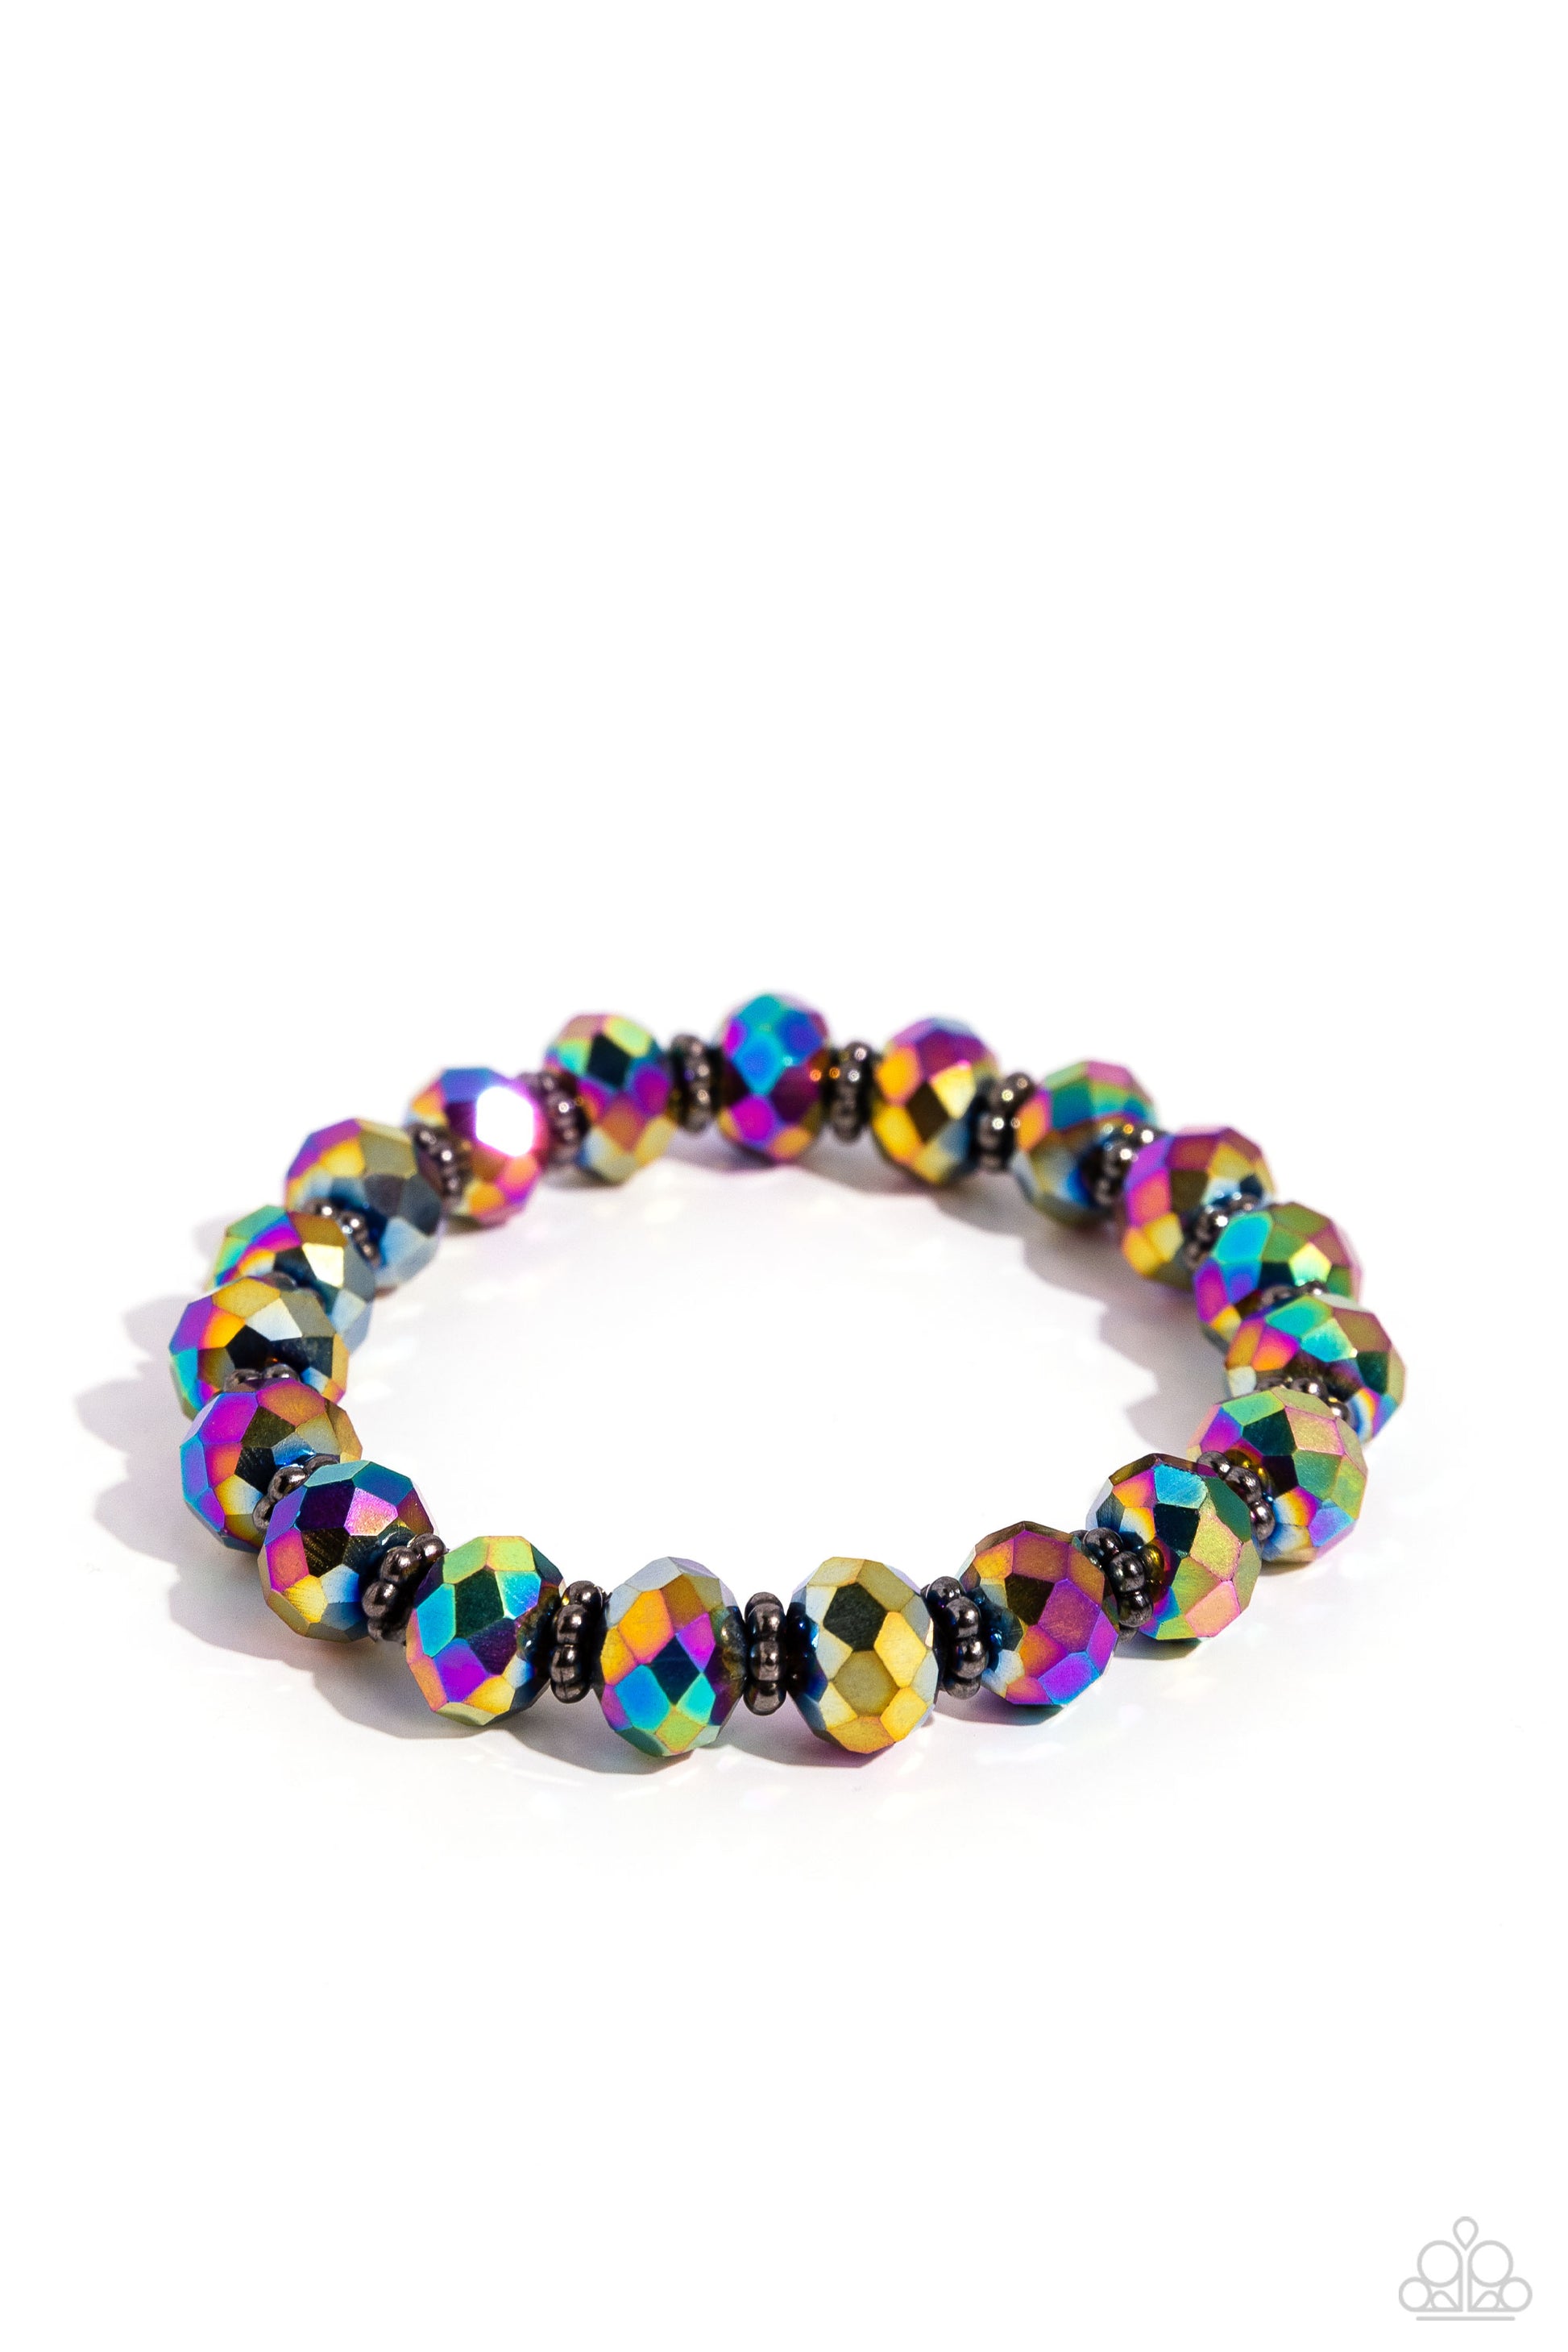 Paparazzi Accessories - Shimmering Satisfaction - Multi Bracelets fipped in metallic shimmer, glittery oil spill crystal-like beads and studded gunmetal rings are threaded along a stretchy band around the wrist for a stellar fashion.  Sold as one individual bracelet.